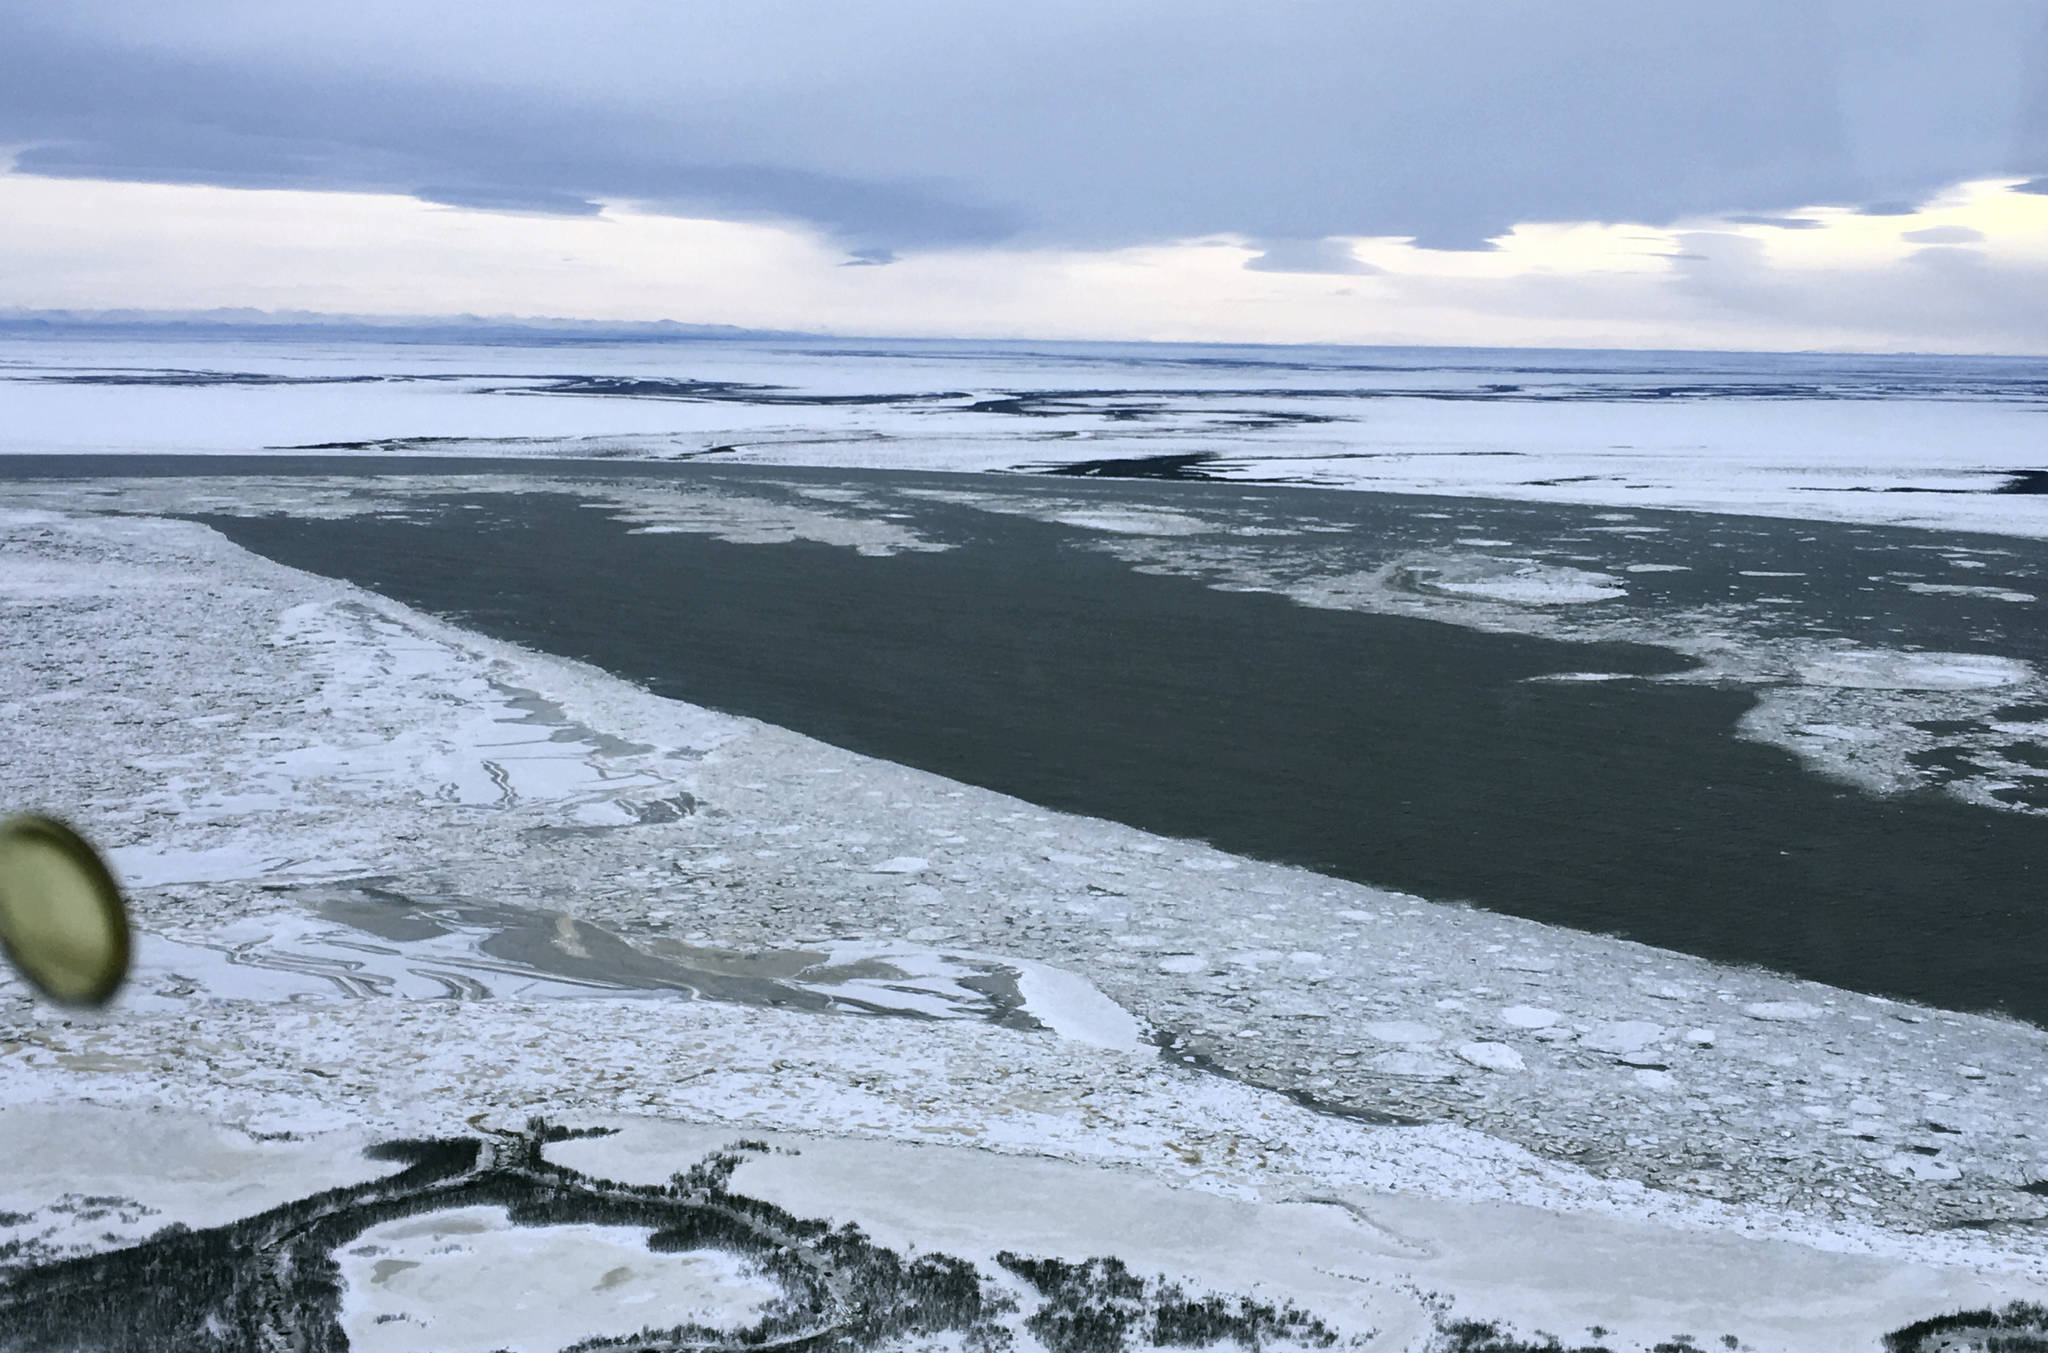 This January, 2018 photo provided by Bethel Search and Rescue shows a portion of the Kuskokwim River near Bethel, Alaska, that is not covered by as much ice as it usually is this time of year. Months of higher-than-normal temperatures have opened dangerous holes in frozen rivers that rural Alaskans use as roads. One troublesome ice highway is the Kuskokwim River, where a man died New Year’s Eve after driving his snowmobile into a hole. (Bethel Search and Rescue)